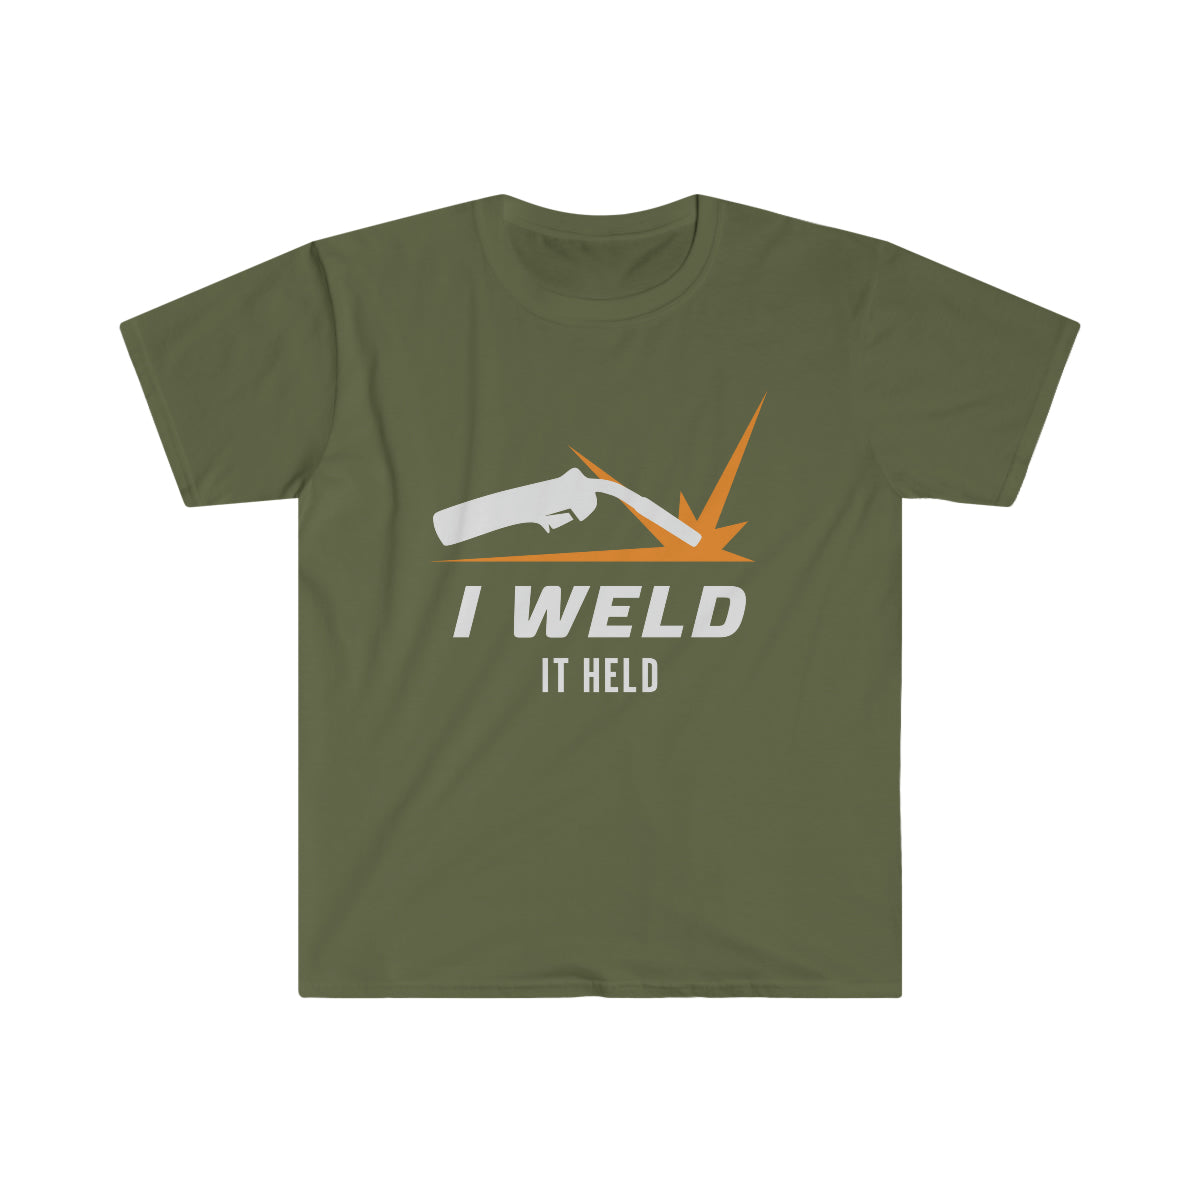 I Weld. It Held - T-shirt - MOVE Bumpers - Military Green